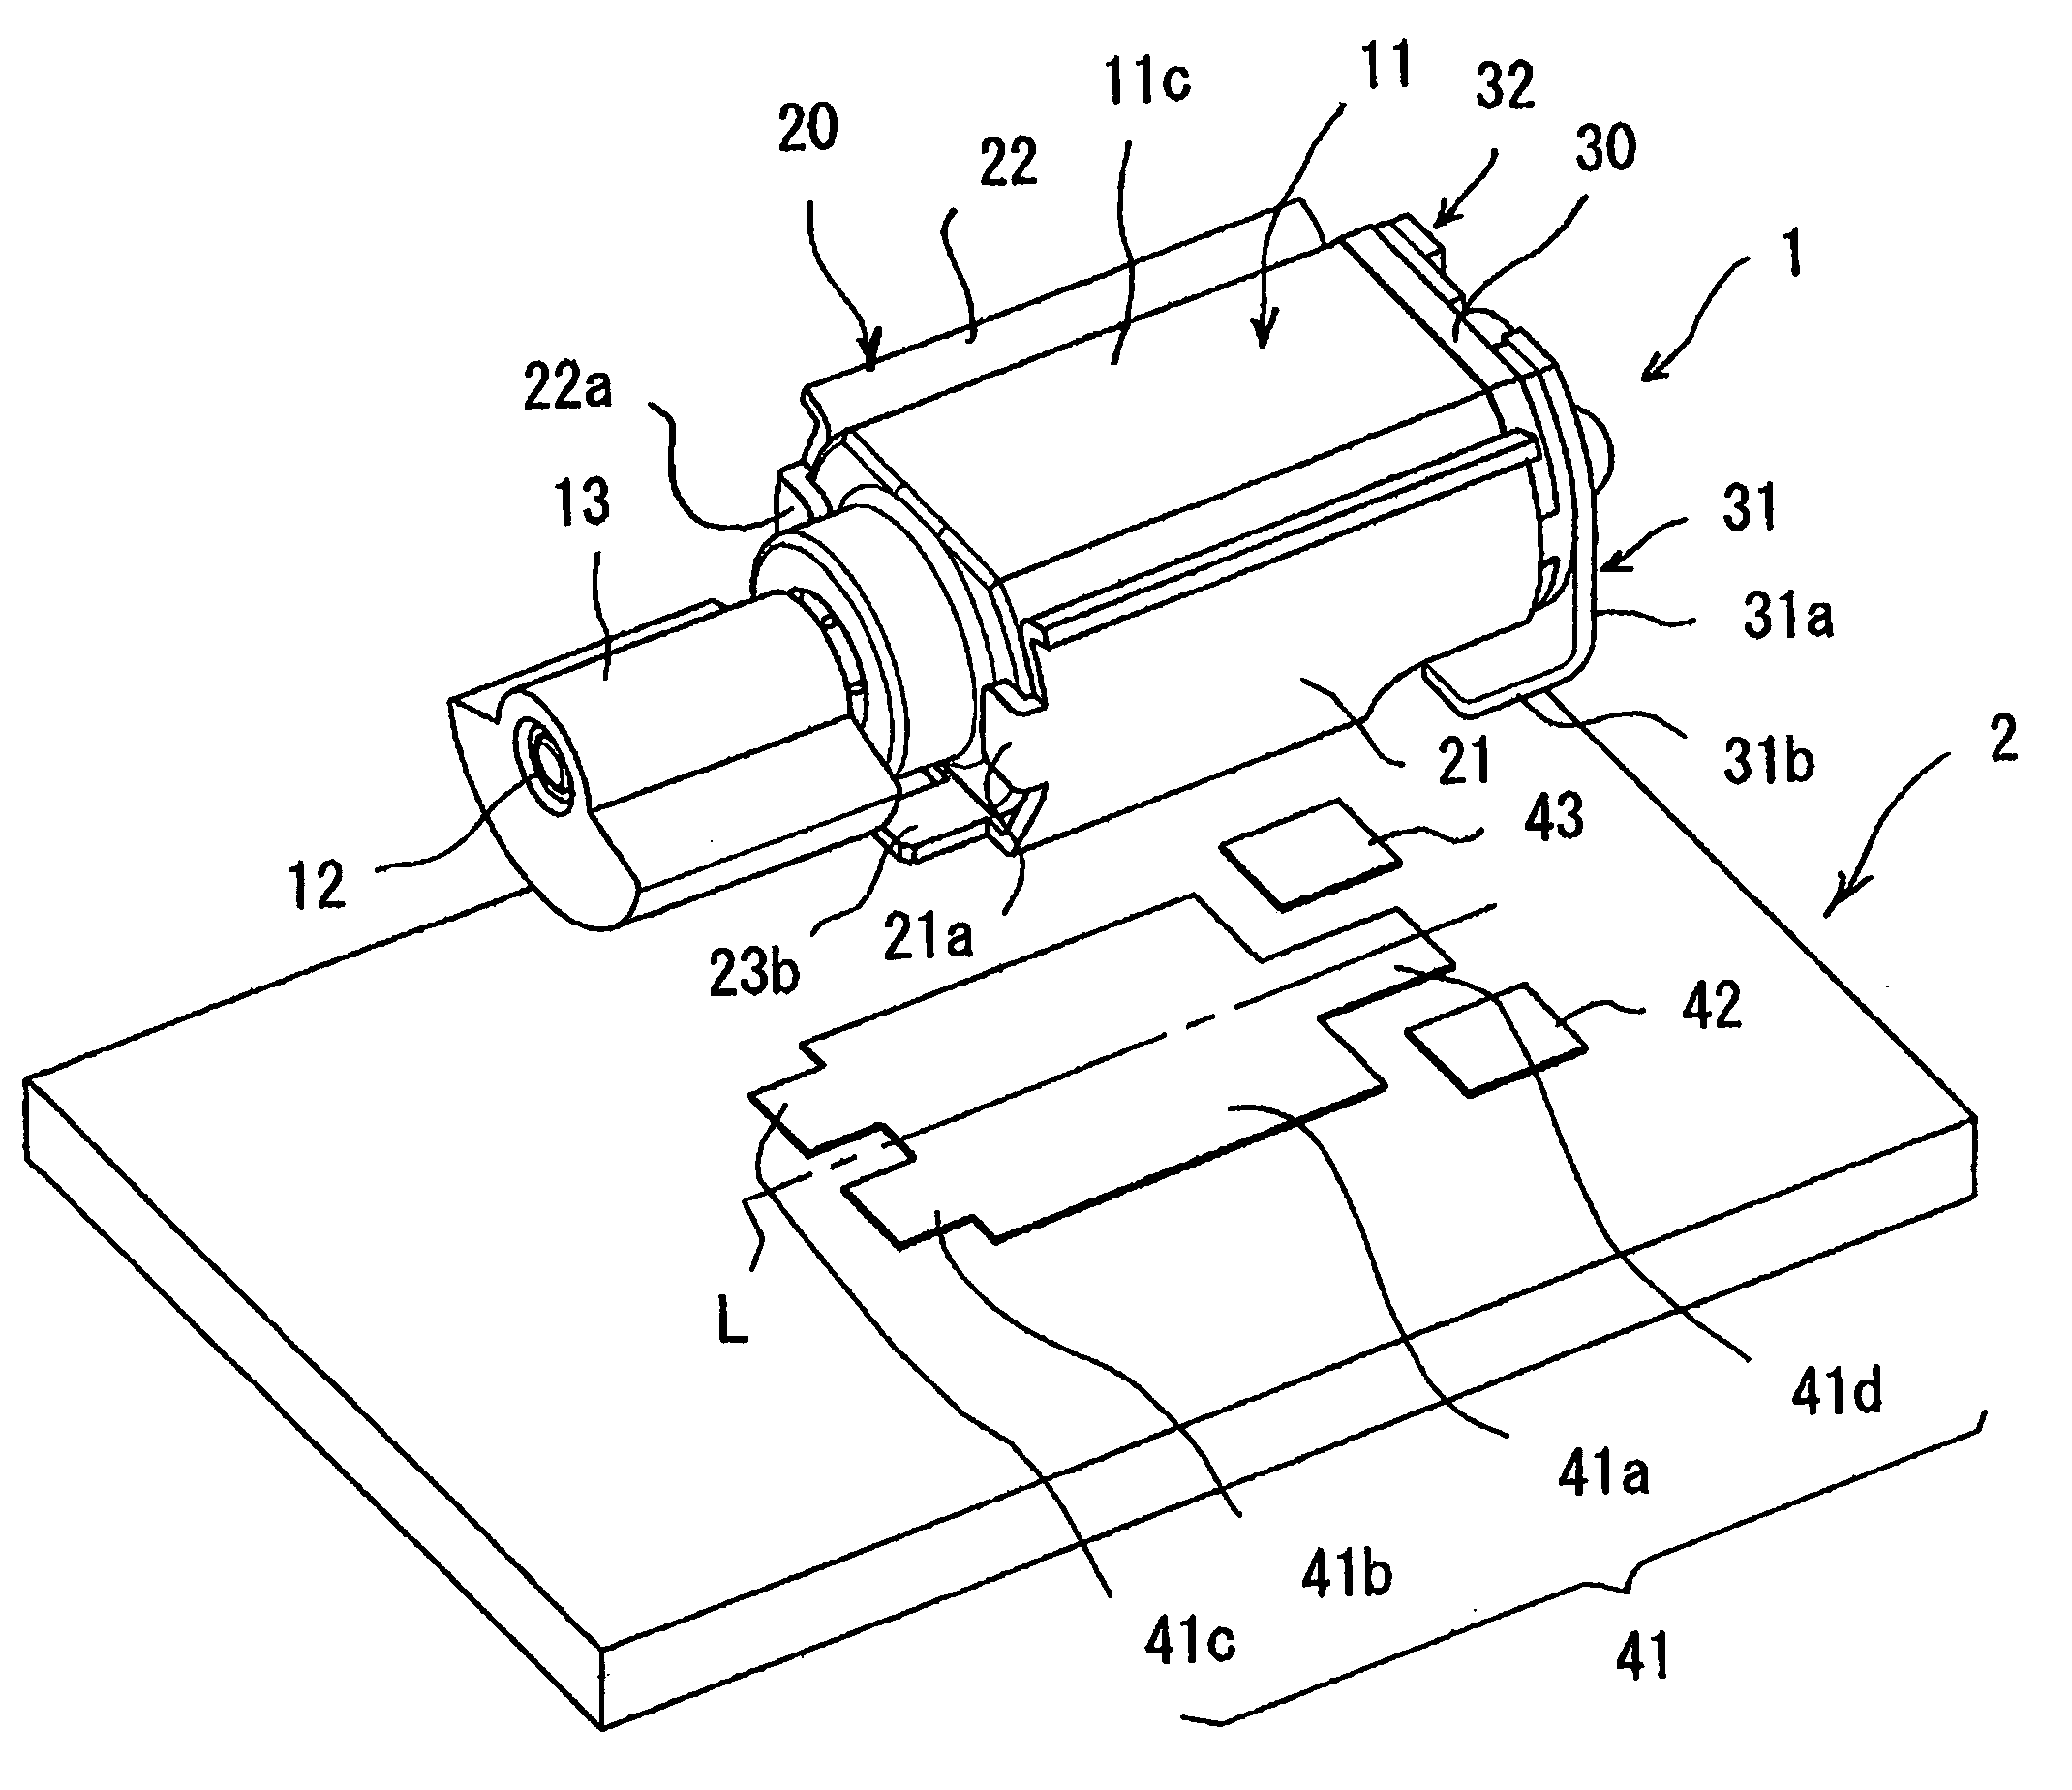 Board mounted structure of vibration motor